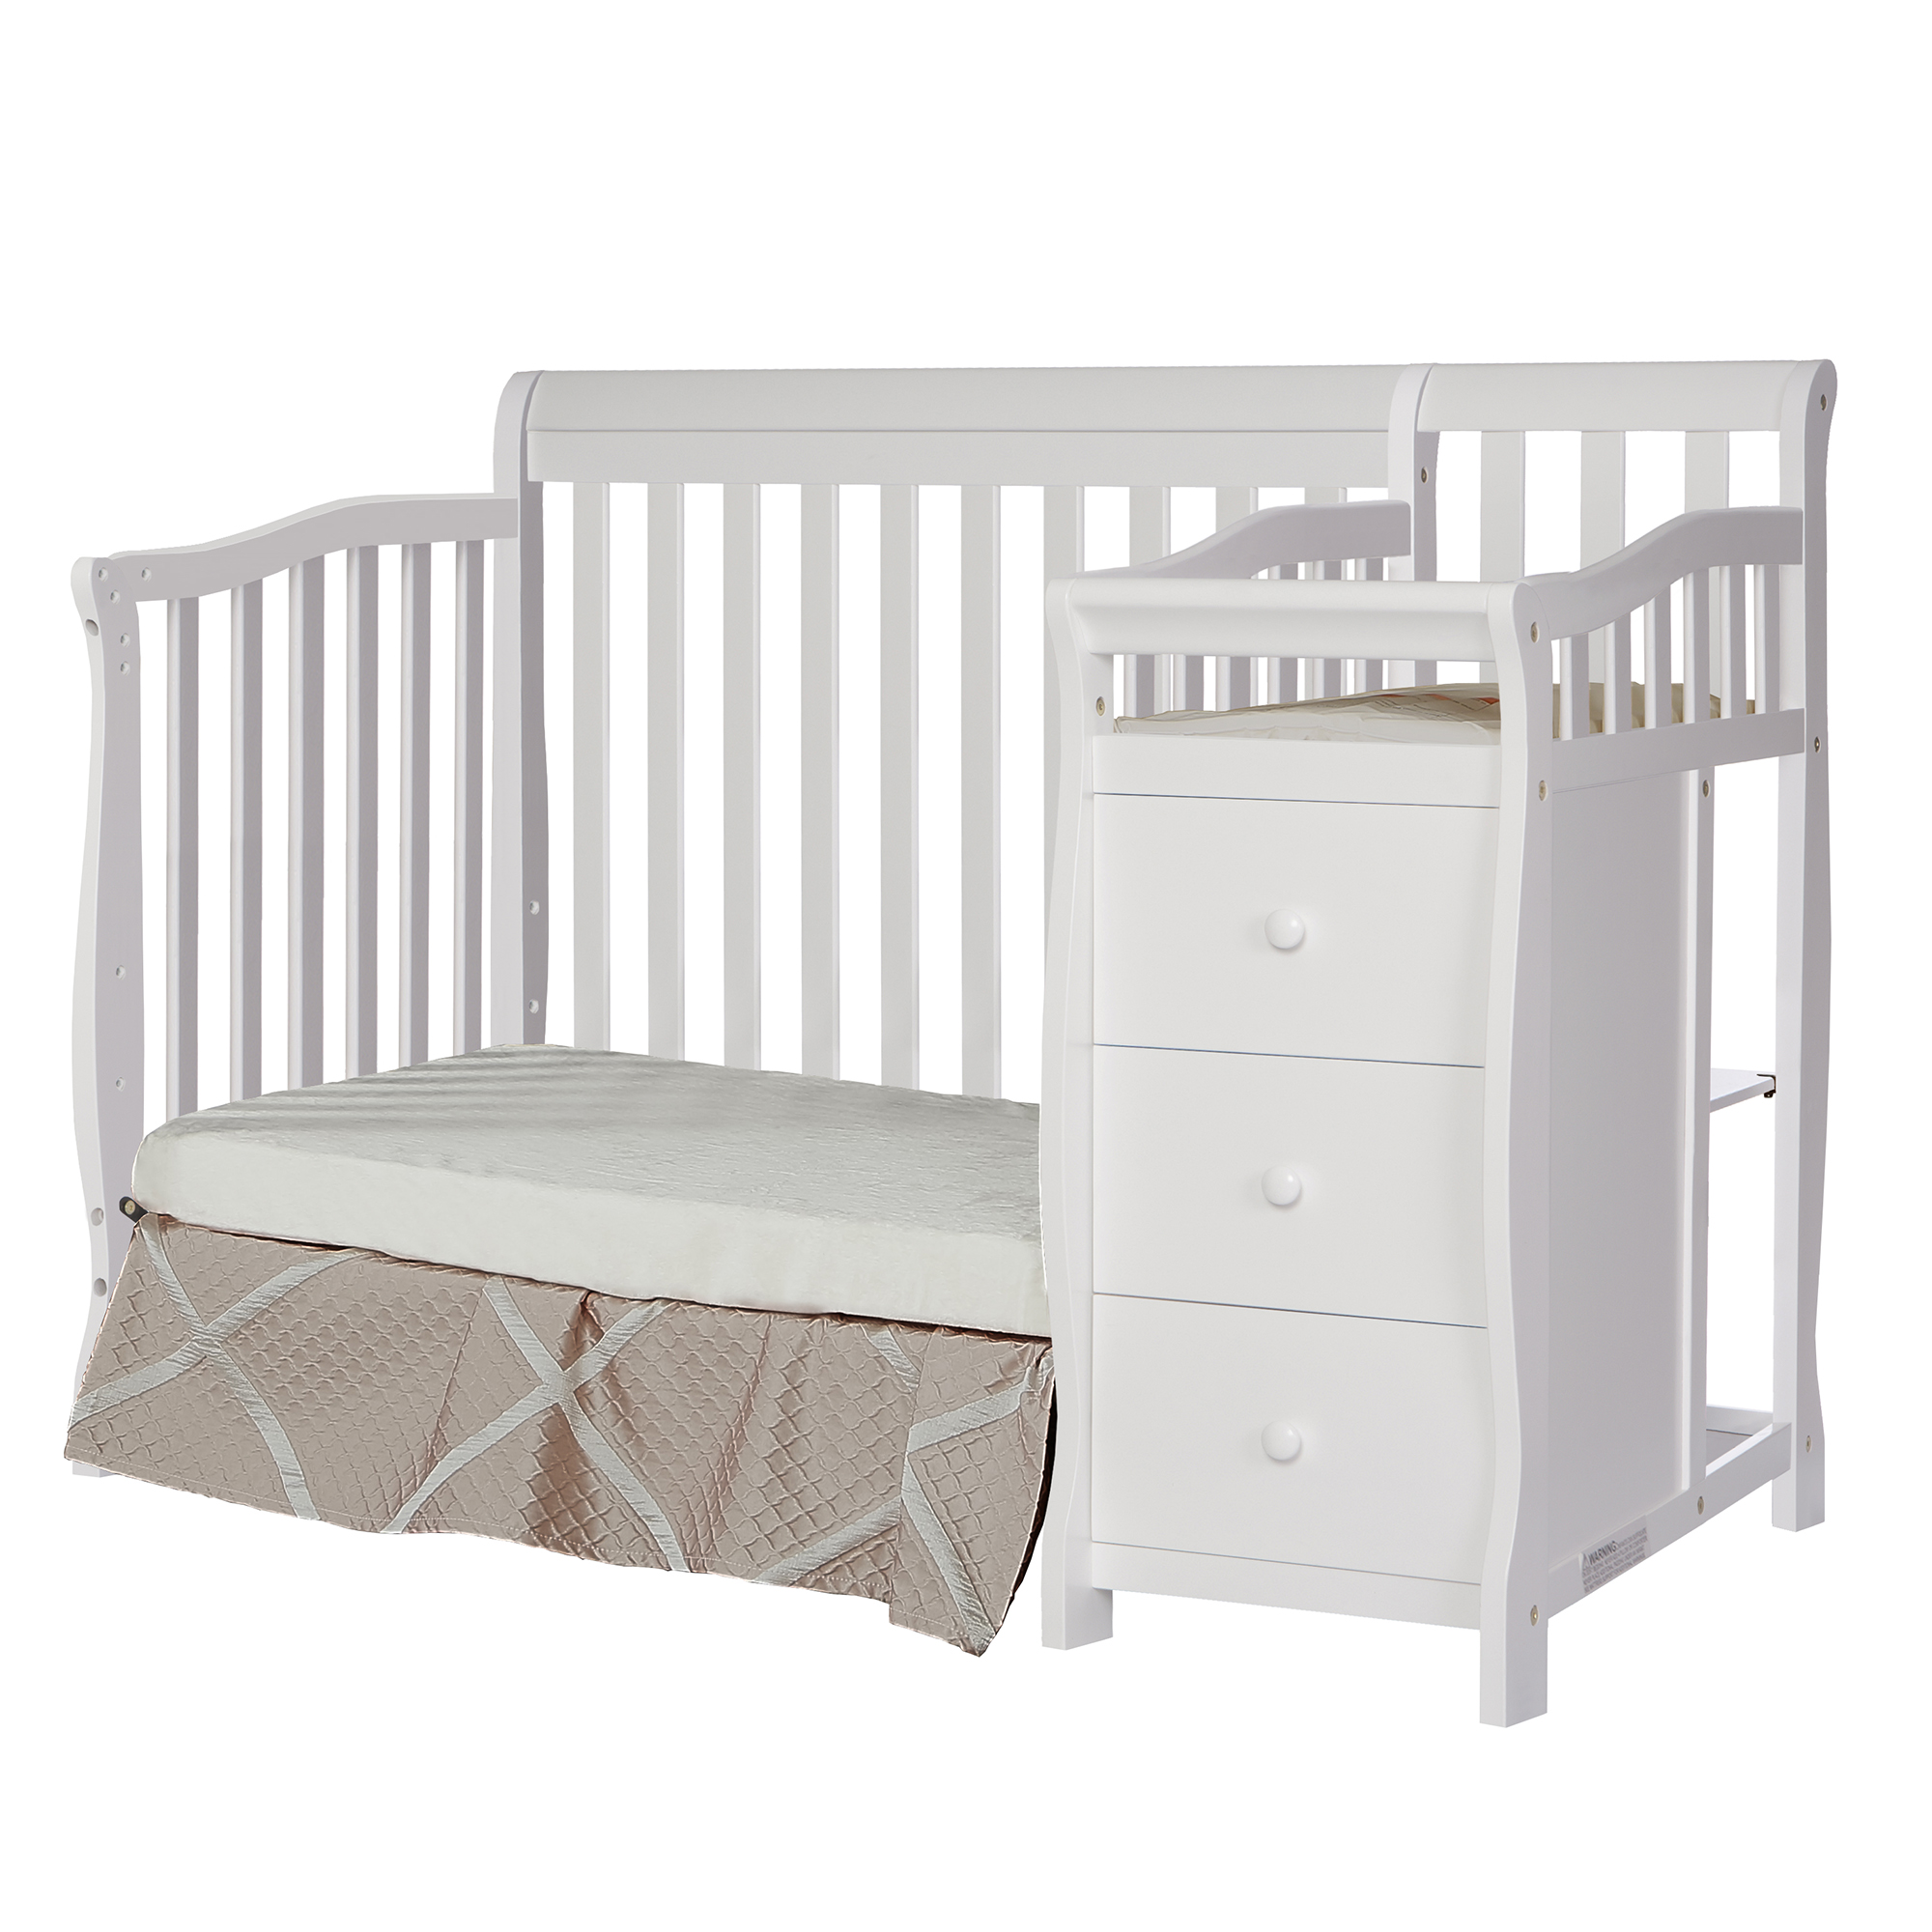 Dream On Me Jayden 4-in-1 Mini Convertible Crib and Changer, White - image 2 of 6